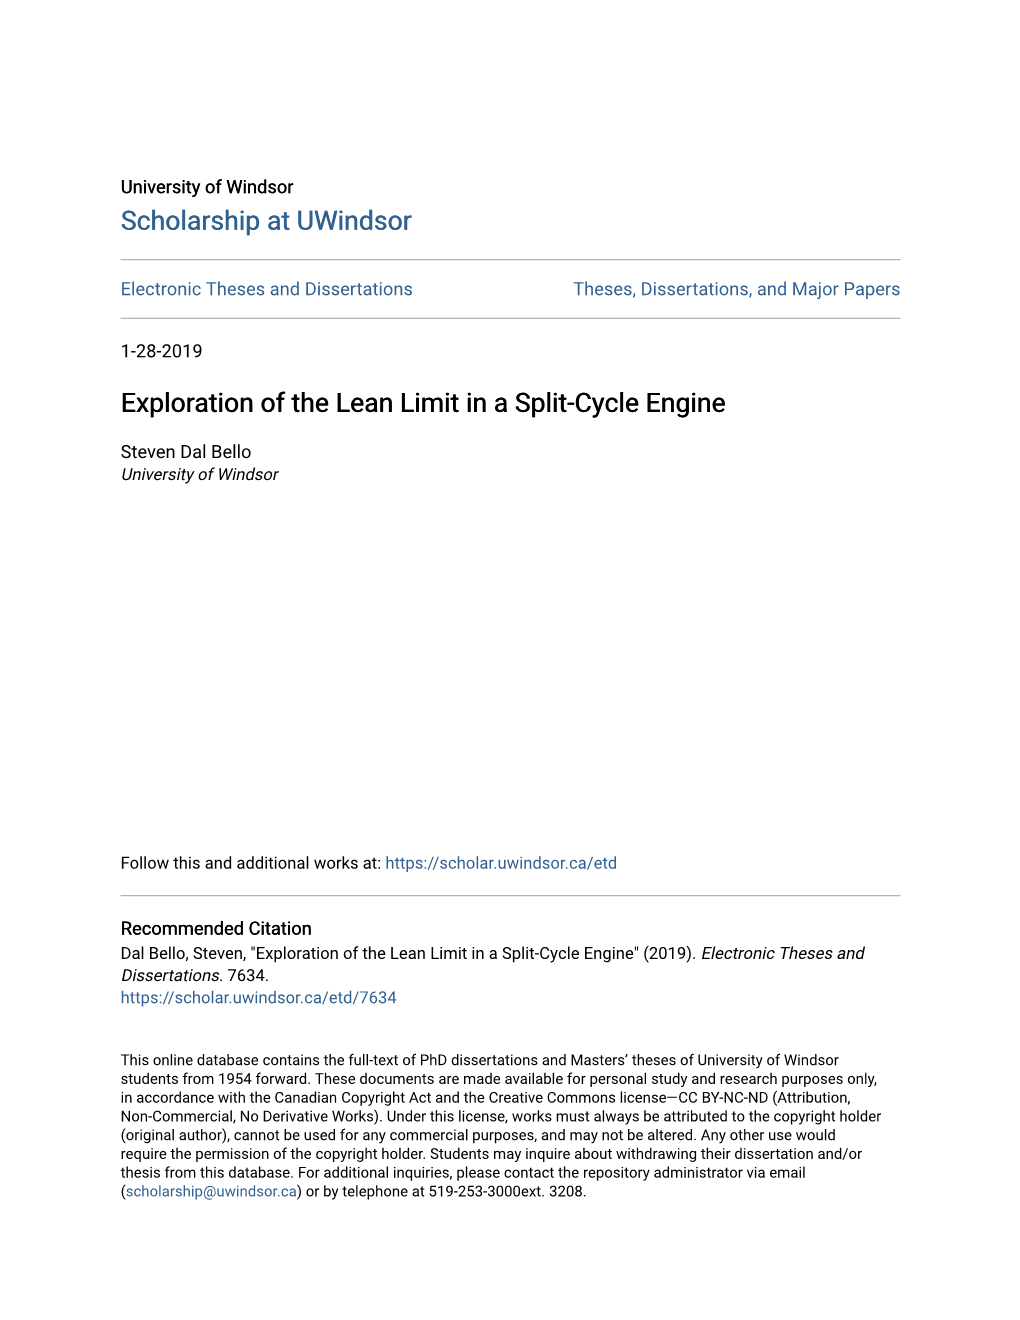 Exploration of the Lean Limit in a Split-Cycle Engine